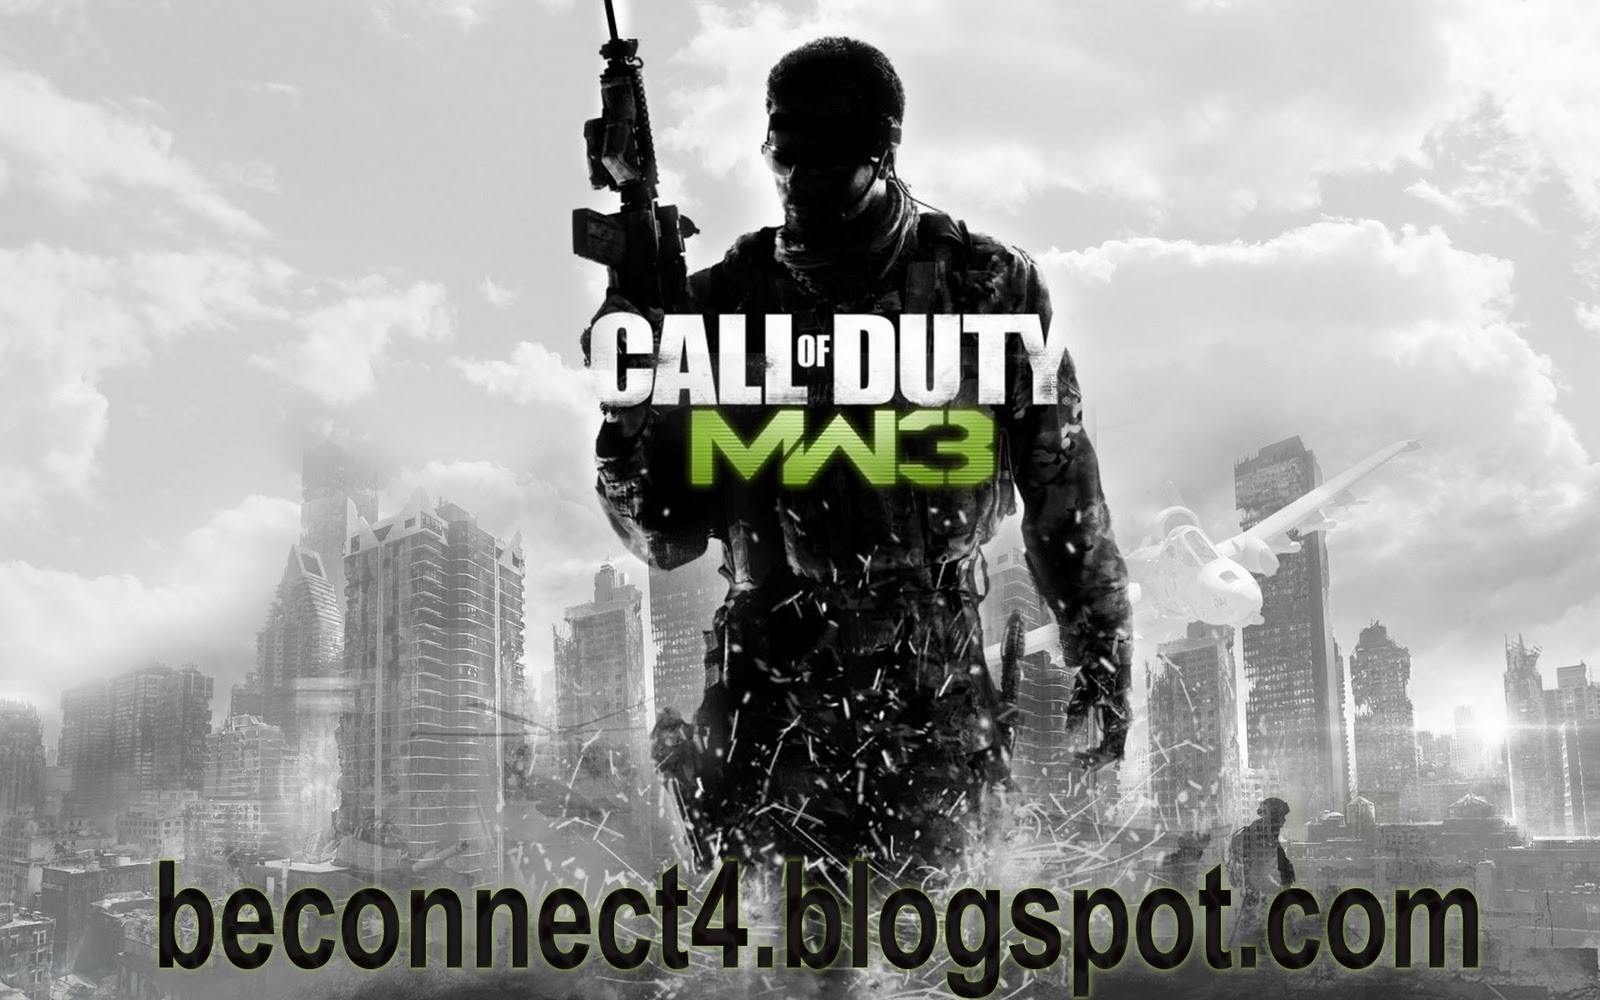 Call of Duty Modern Warfare 3 Game Download Free Full Version